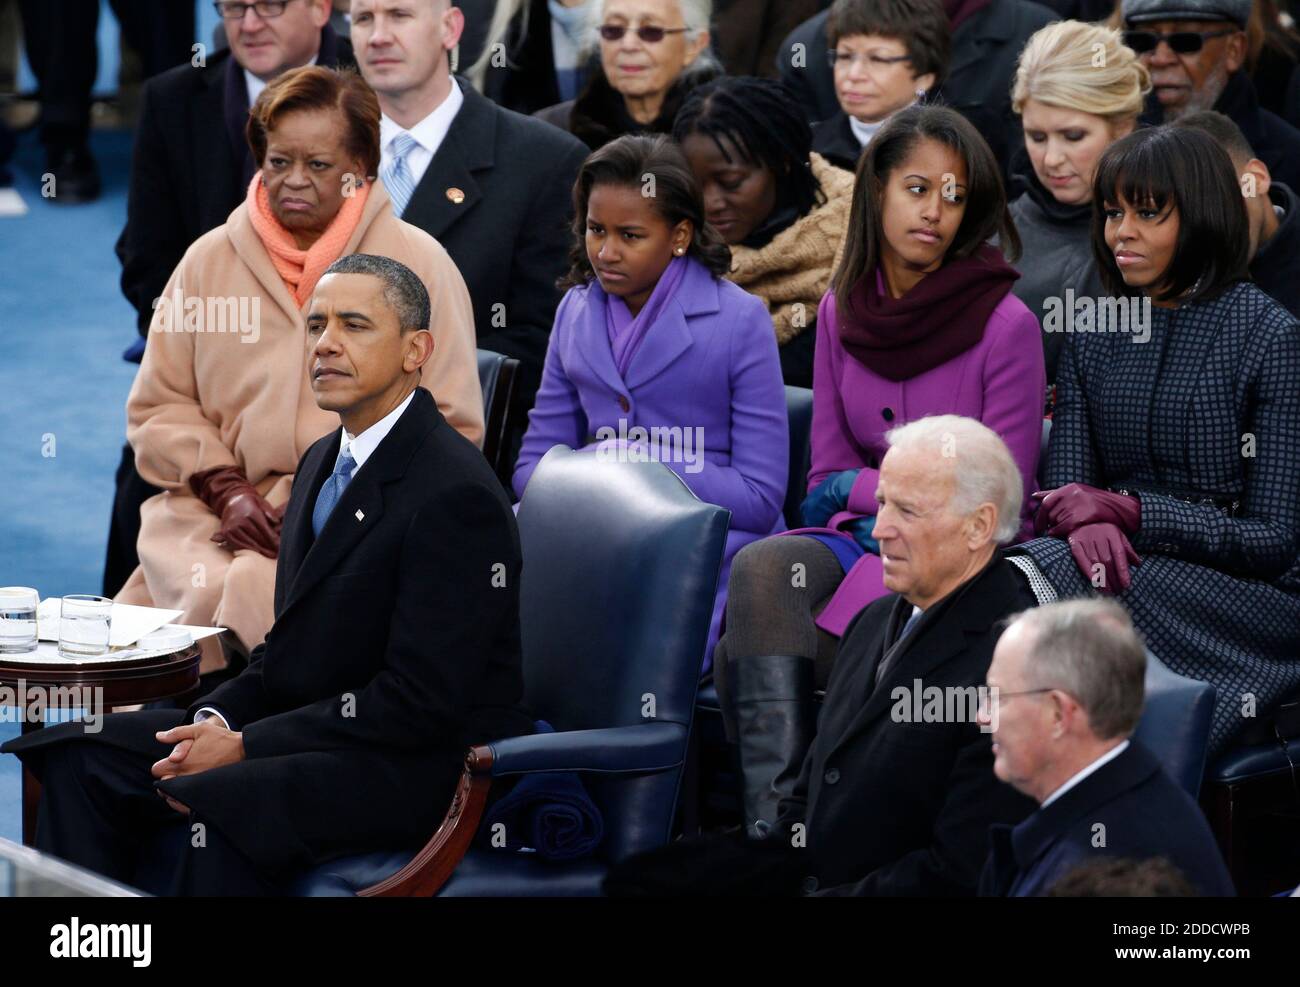 NO FILM, NO VIDEO, NO TV, NO DOCUMENTARY - After delivering his inauguration speech, U.S. President Barack Obama listens to Kelly Clarkson during ceremonies on the West Front of the U.S Capitol in Washington, D.C., January 21, 2013. Photo by Brian Cassella/Chicago Tribune/MCT/ABACAPRESS.COM Stock Photo